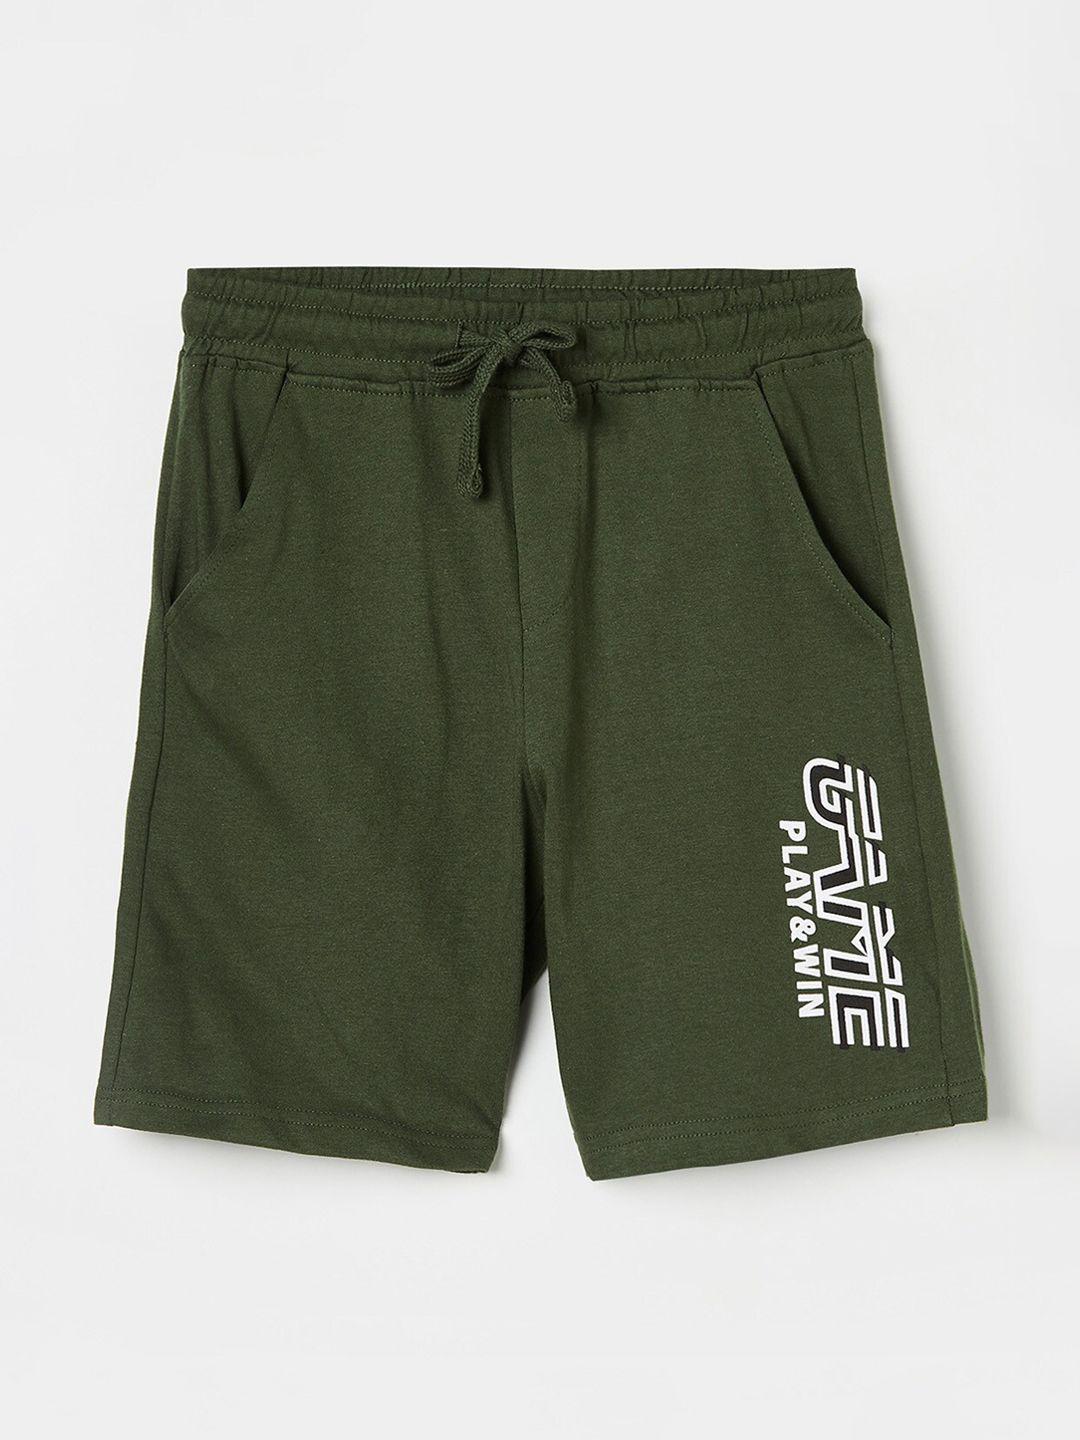 fame-forever-by-lifestyle-boys-olive-green-solid-cotton-shorts